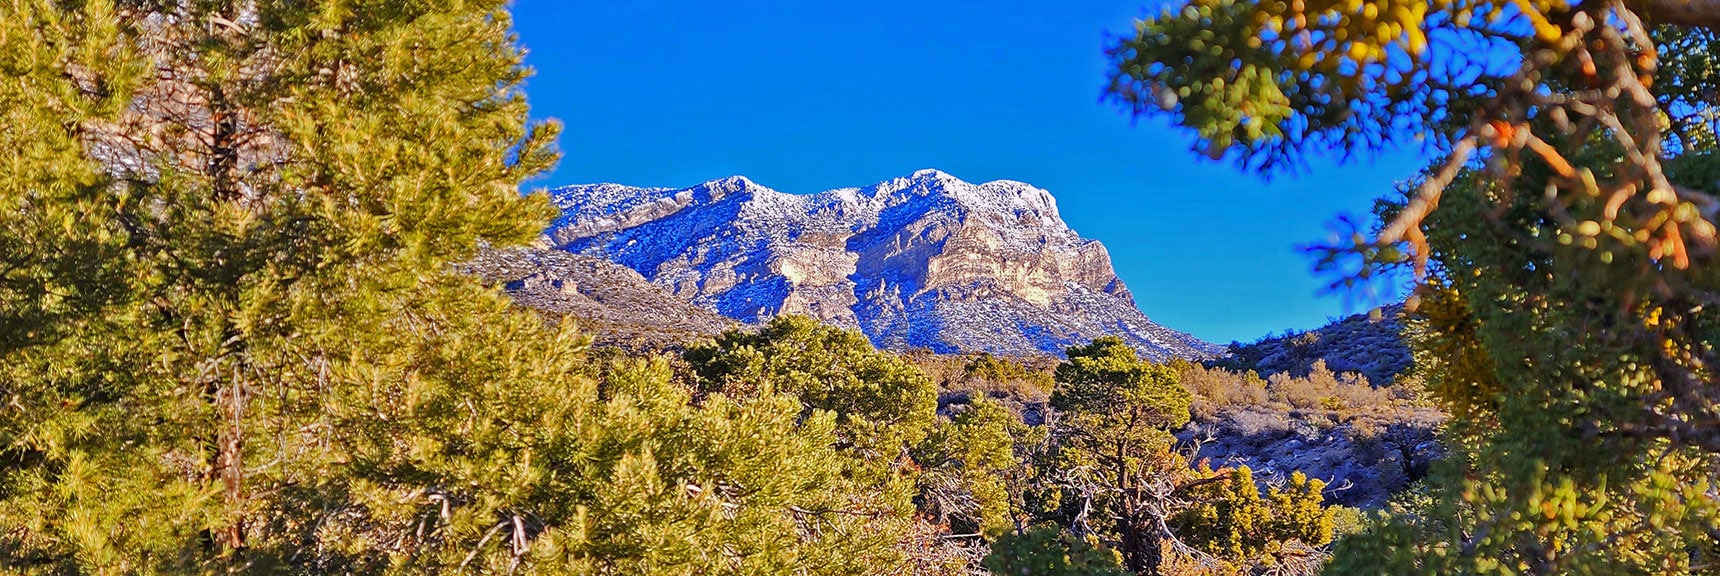 El Padre Mountain Through Opening in Pine Forest, NE Side of White Rock Mt. | White Rock Mountain Loop Trail | Red Rock Canyon, Nevada